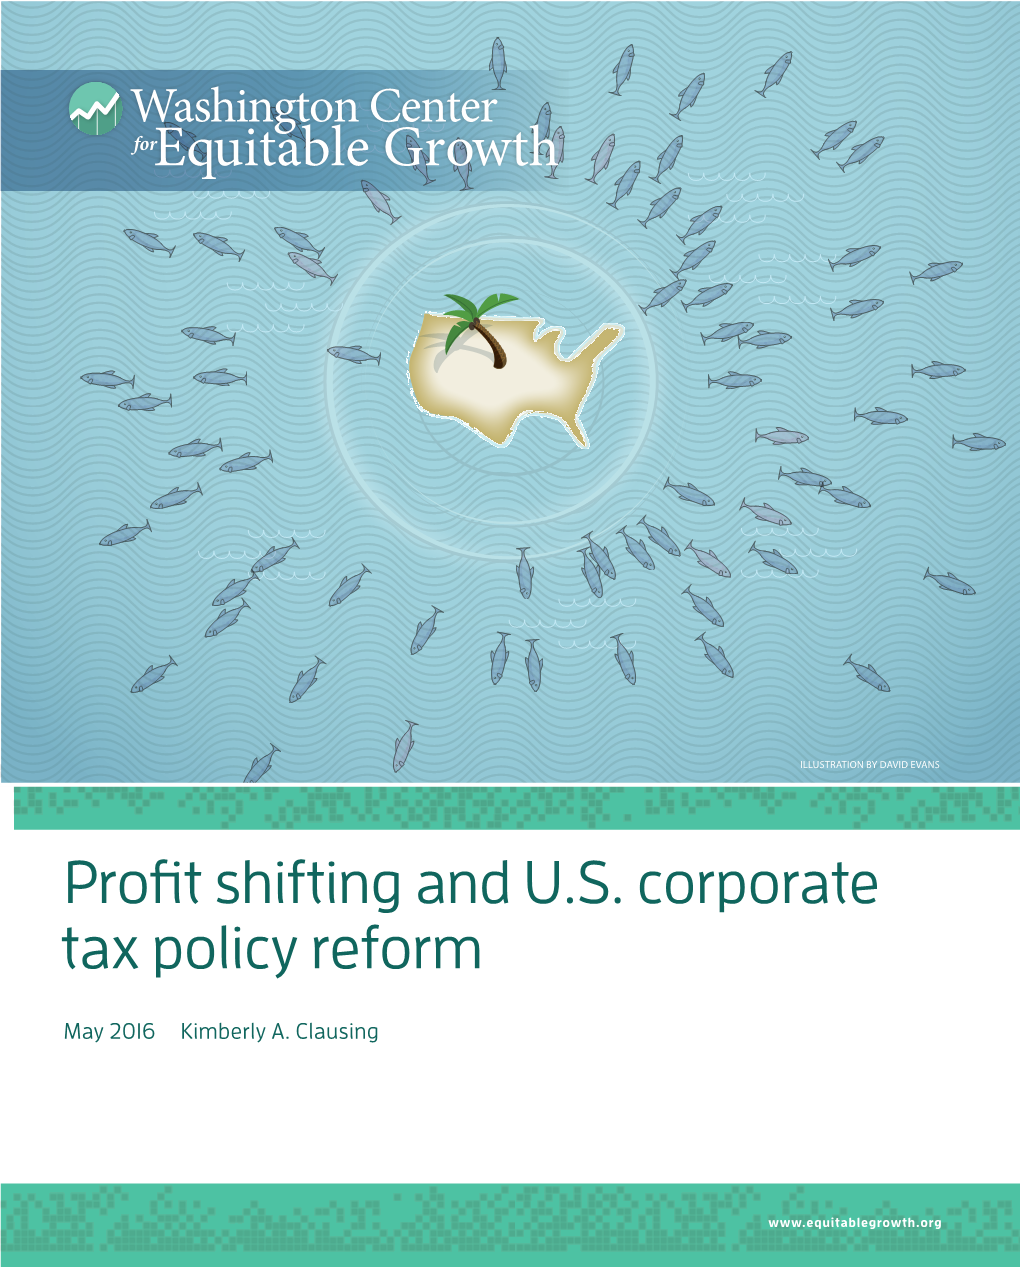 Download File Profit Shifting and U.S. Corporate Tax Policy Reform